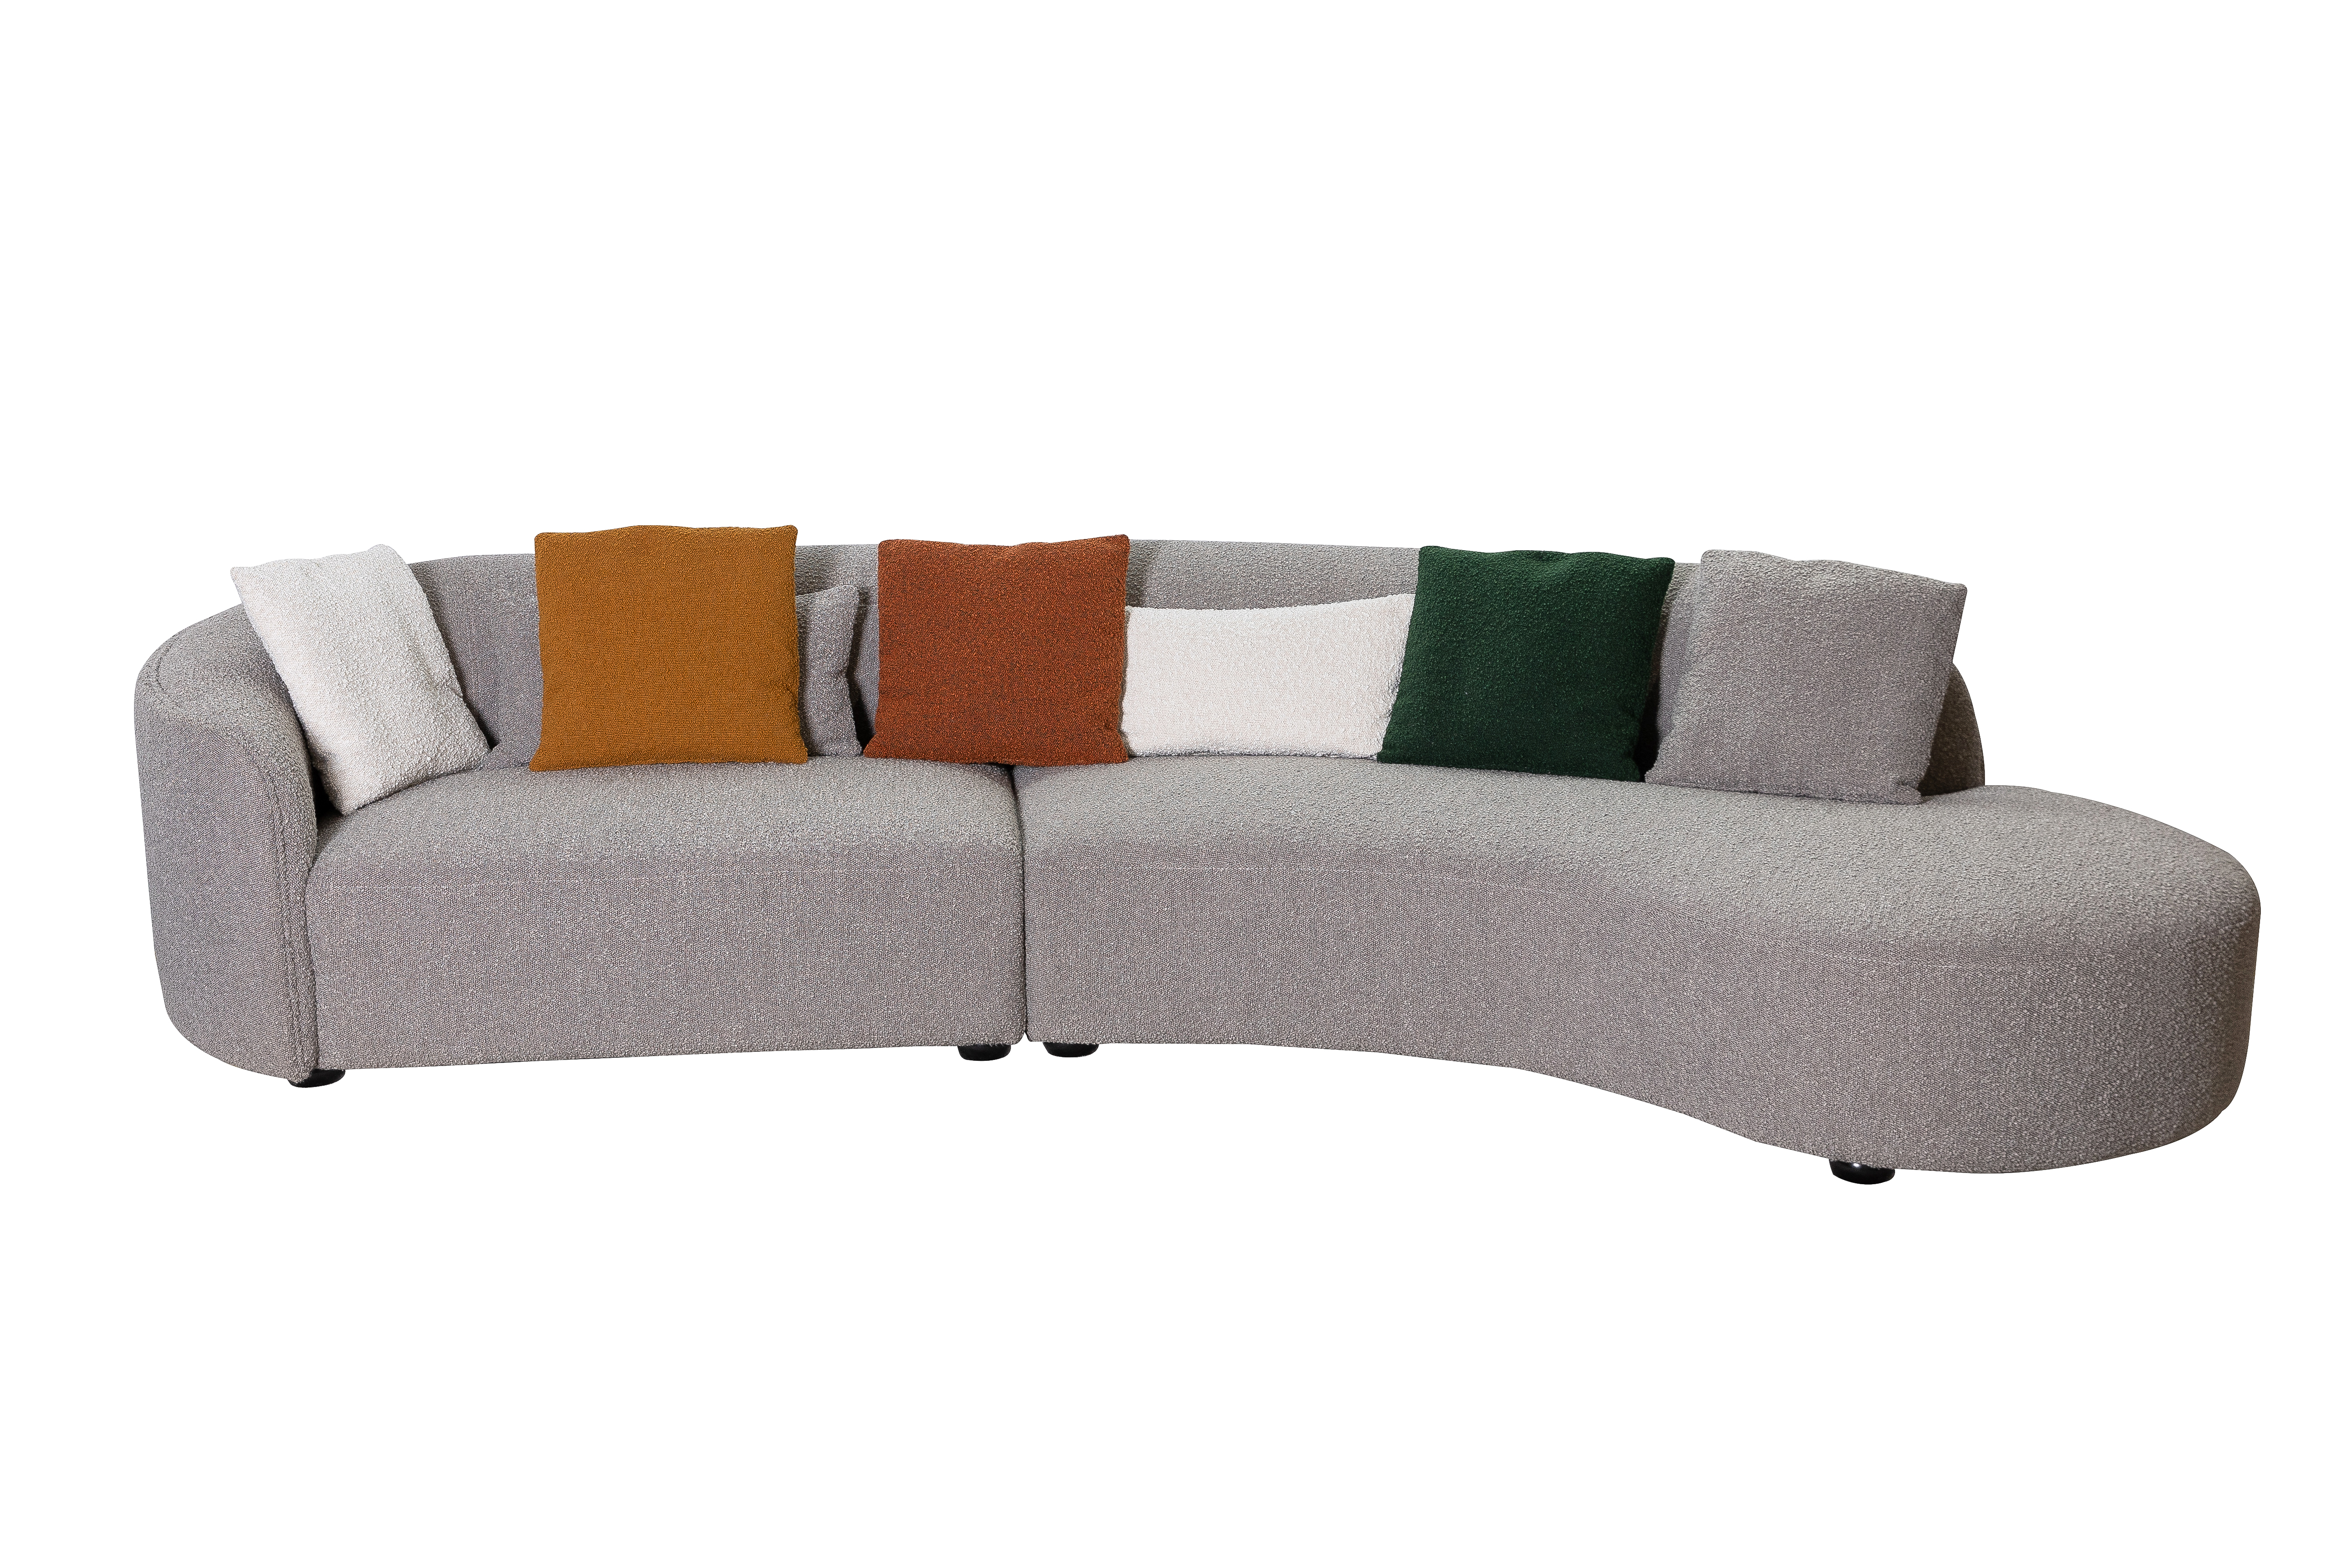 handmade sectional sofa manufacturers, customized sectional sofa supplier